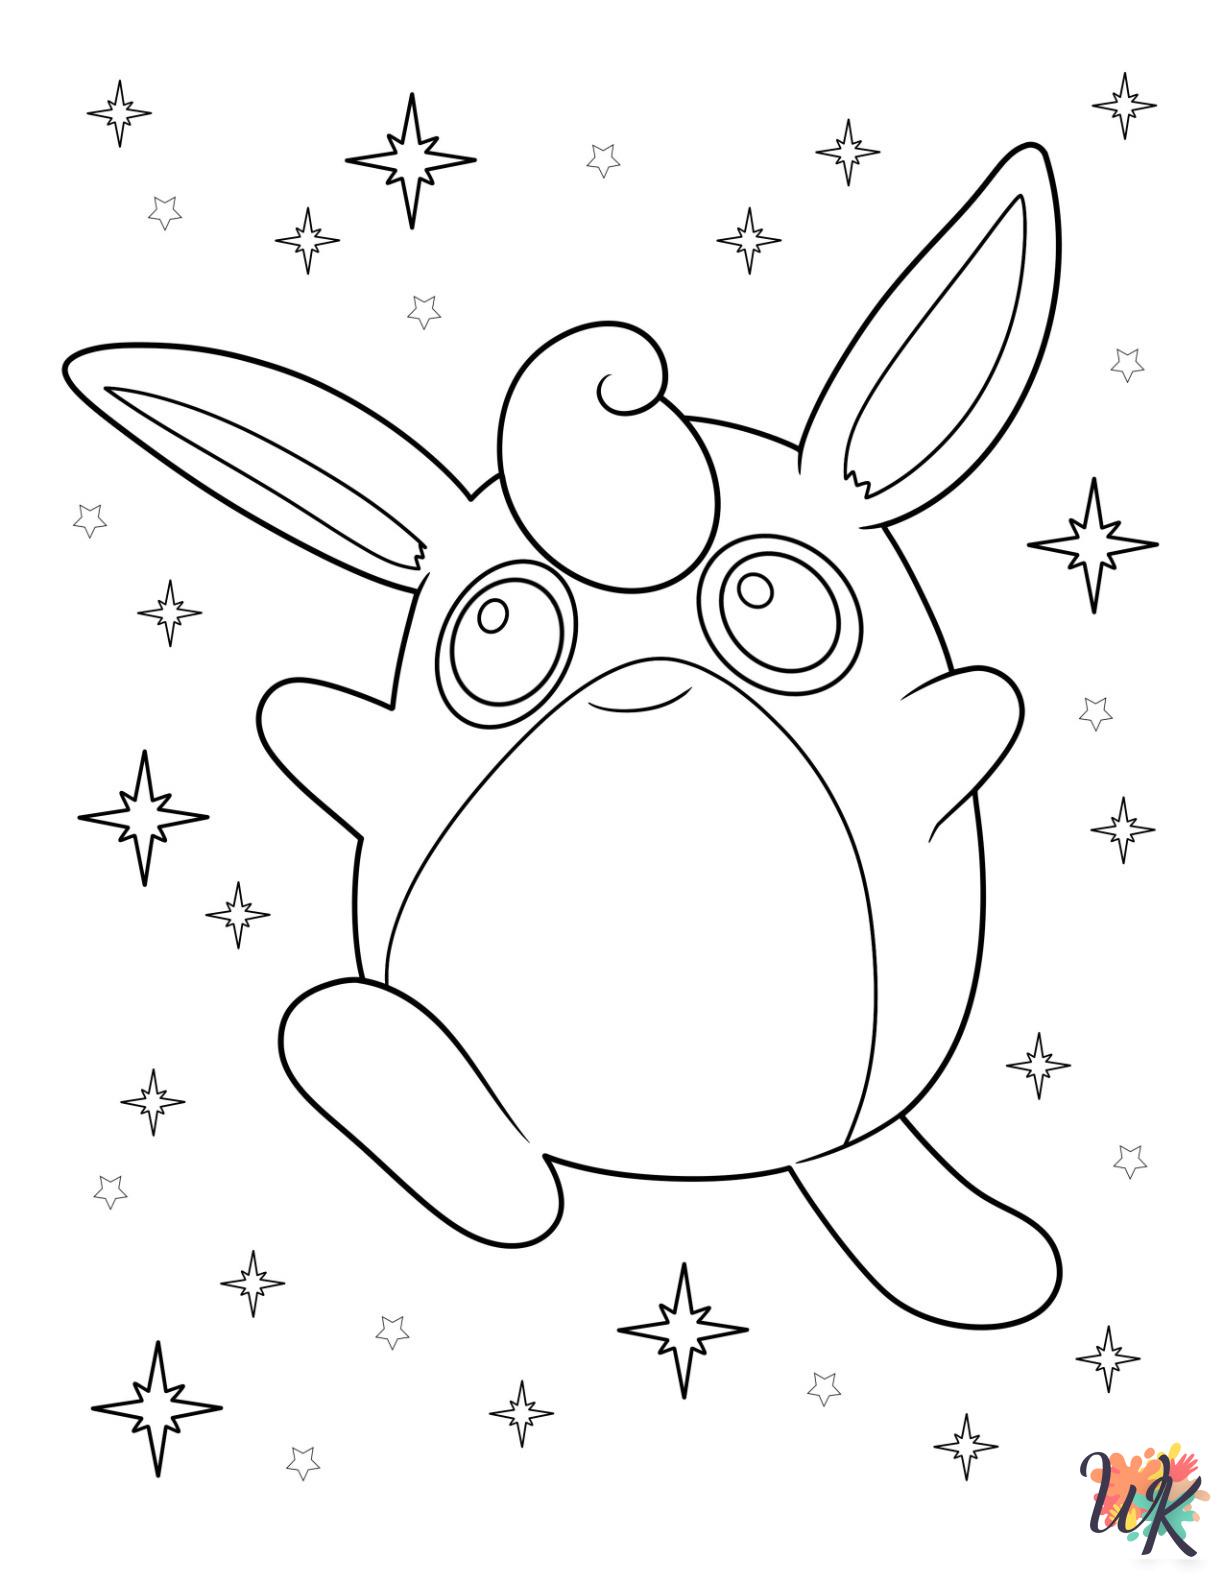 printable Jigglypuff coloring pages for adults